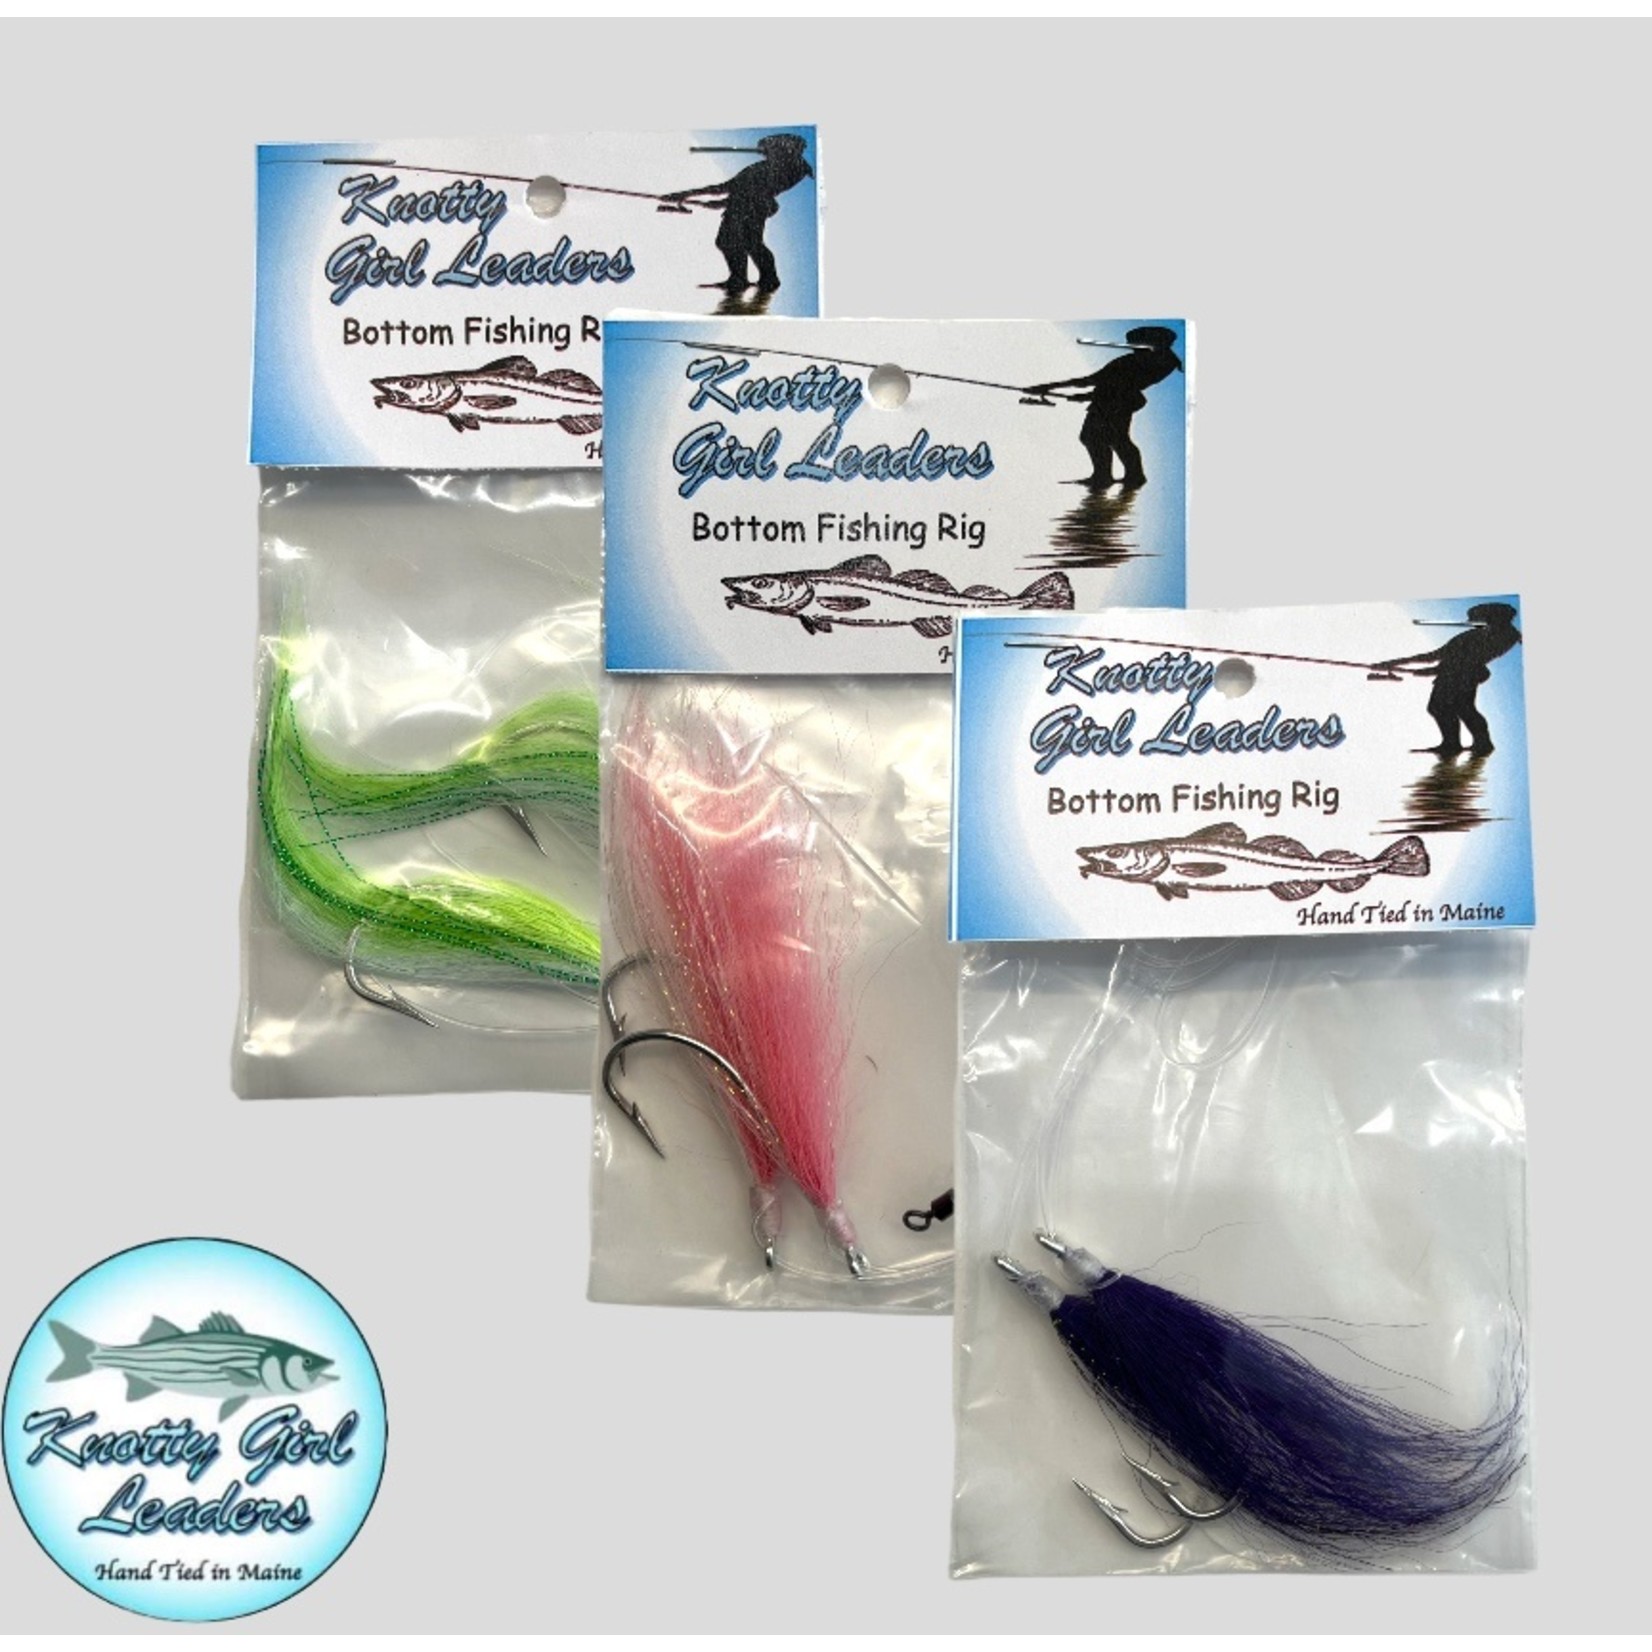 Knotty Girl Leaders Knotty Girl Bottom Fish Rigs